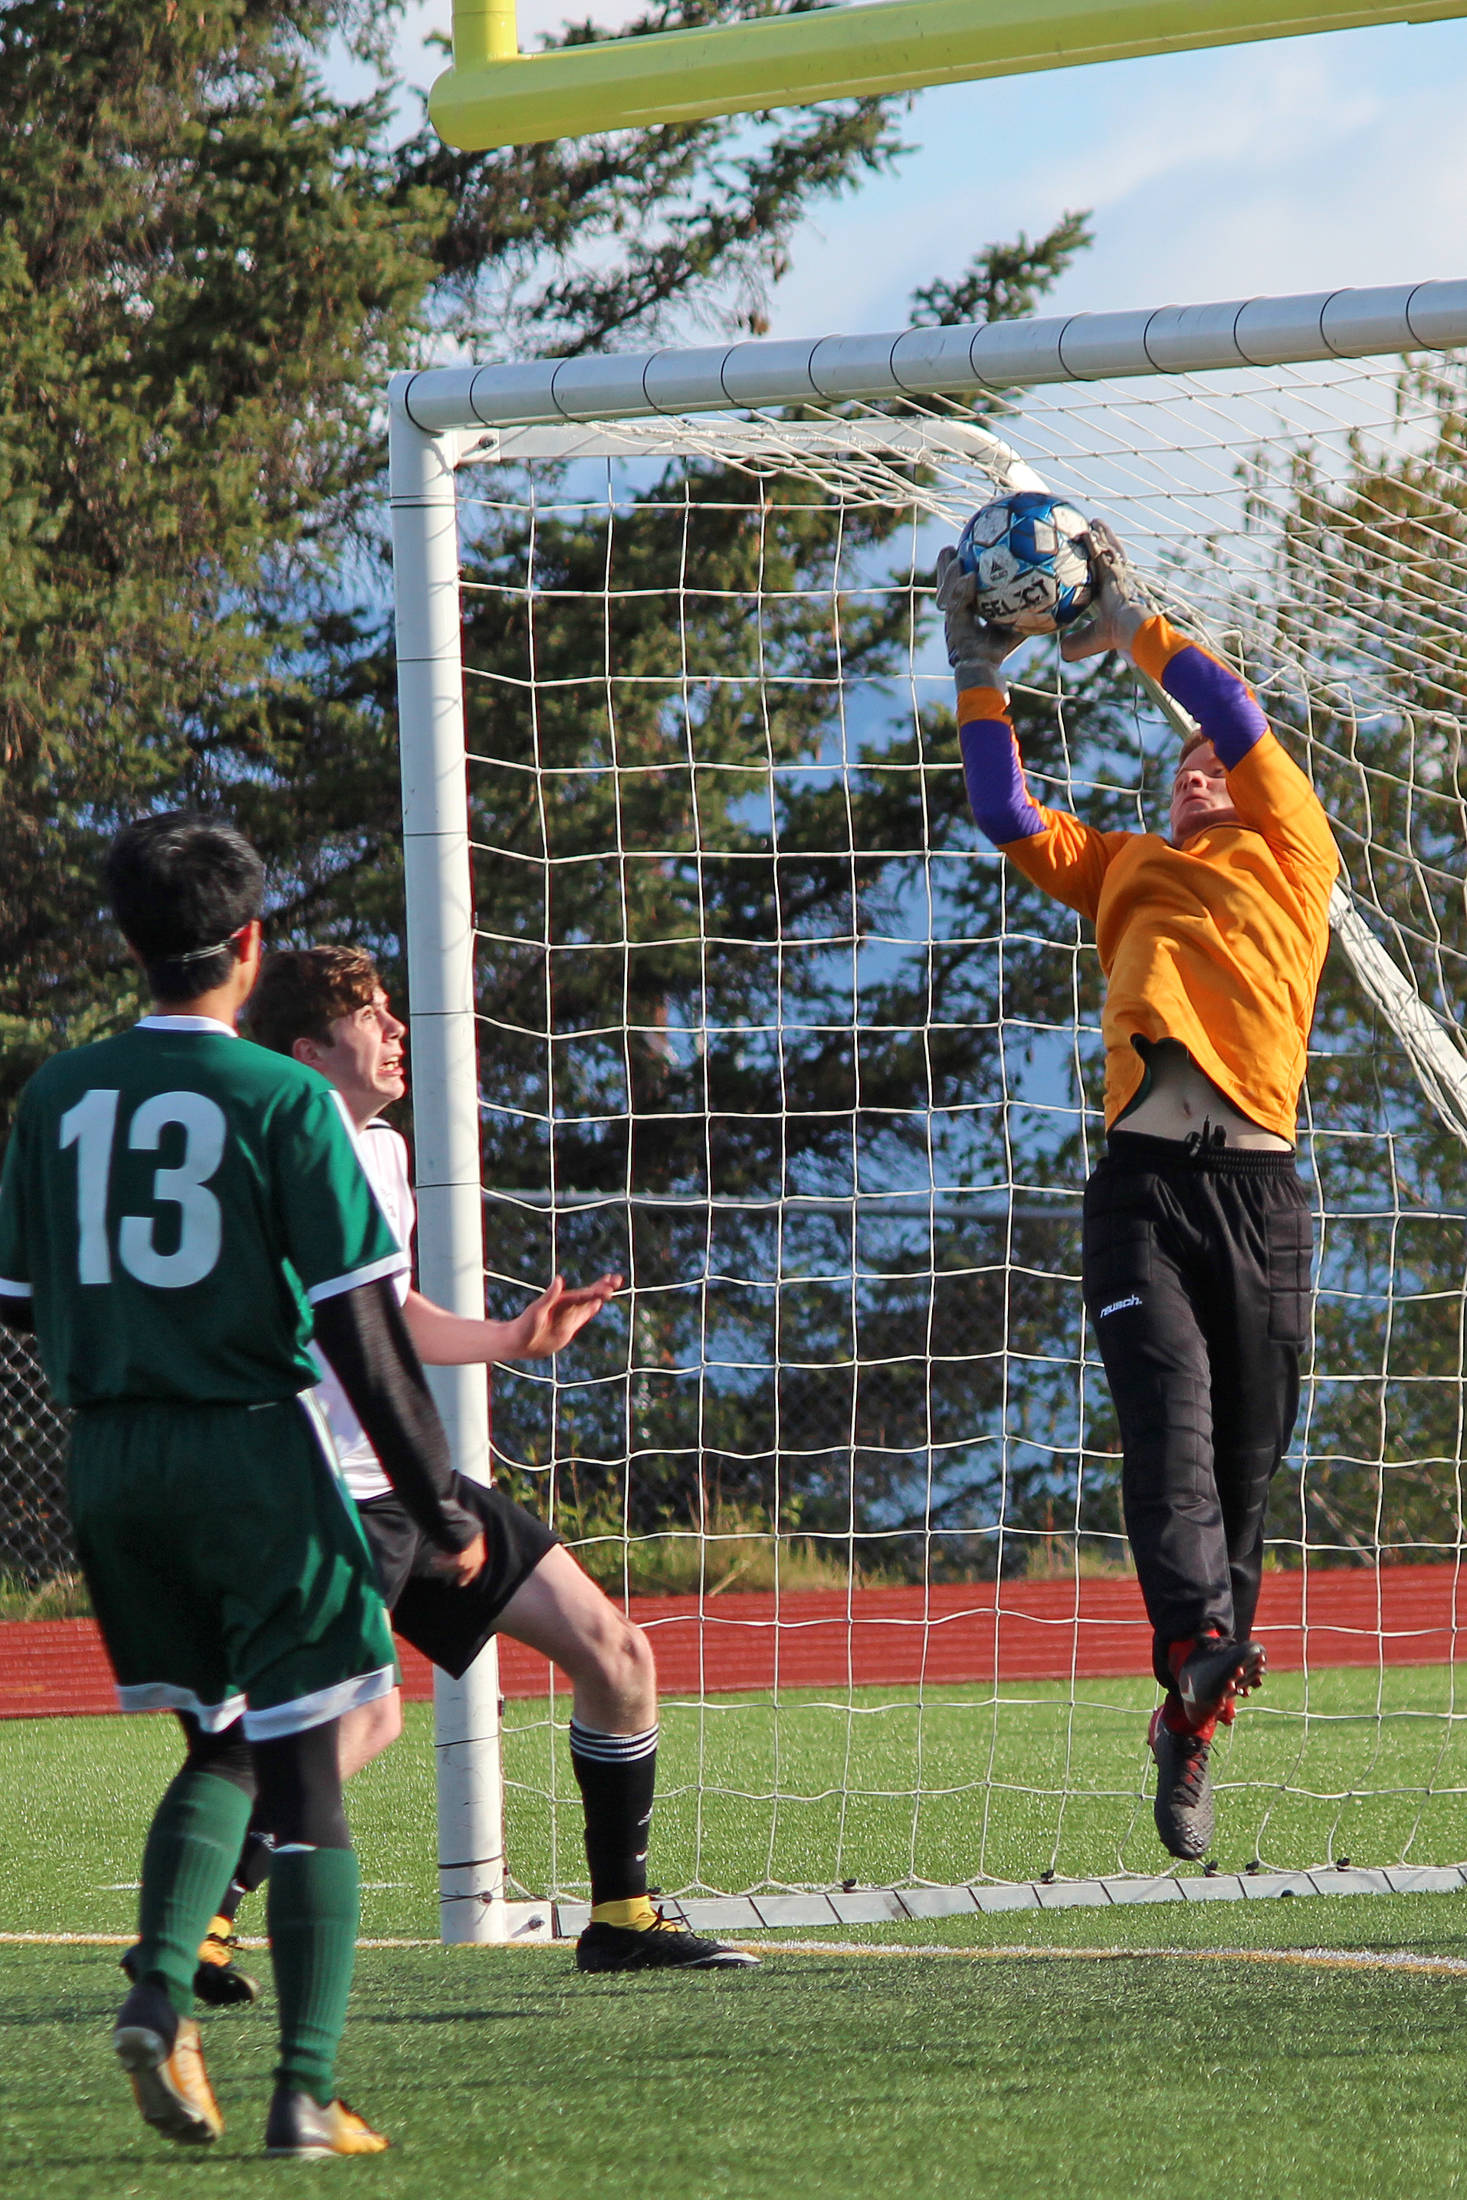 Seward goalkeeper Collin Mullaly snags the ball out of the air during a matchup between the Seahawks and Nikiski on Thursday, May 16, 2019 for the Peninsula Conference Soccer Tournament at Homer High School in Homer, Alaska. (Photo by Megan Pacer/Homer News)